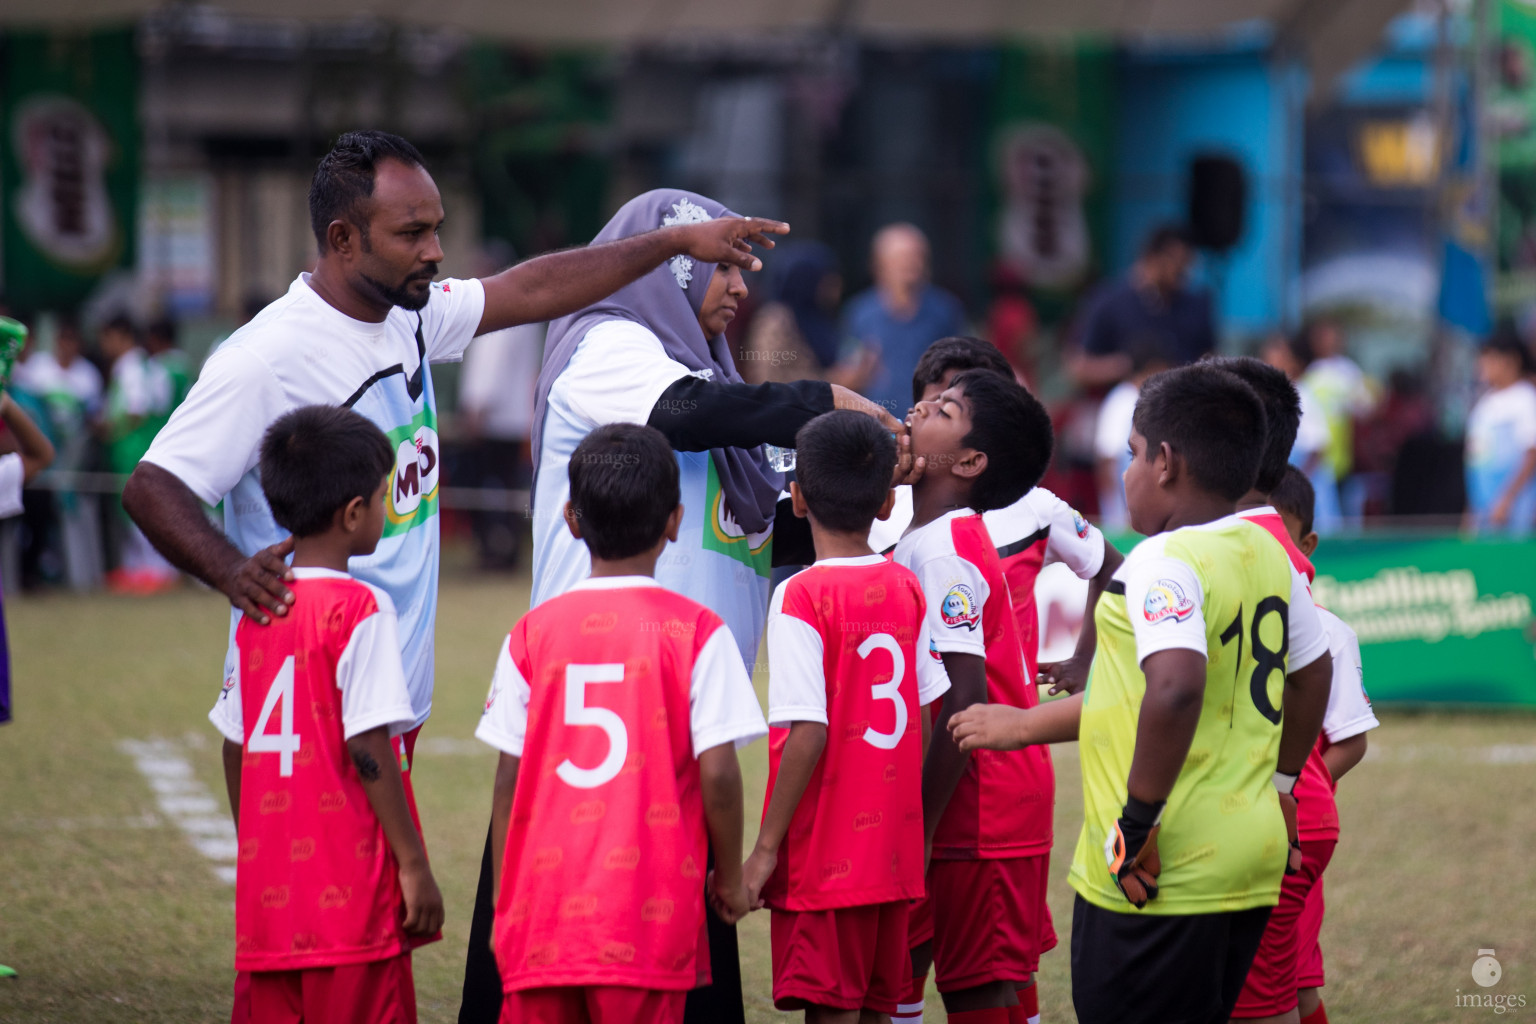 Milo Kids Football Fiesta Day 2 in Henveiru Grounds in Male', Maldives, Thursday, February 20th 2019 (Images.mv Photo/Suadh Abdul Sattar)